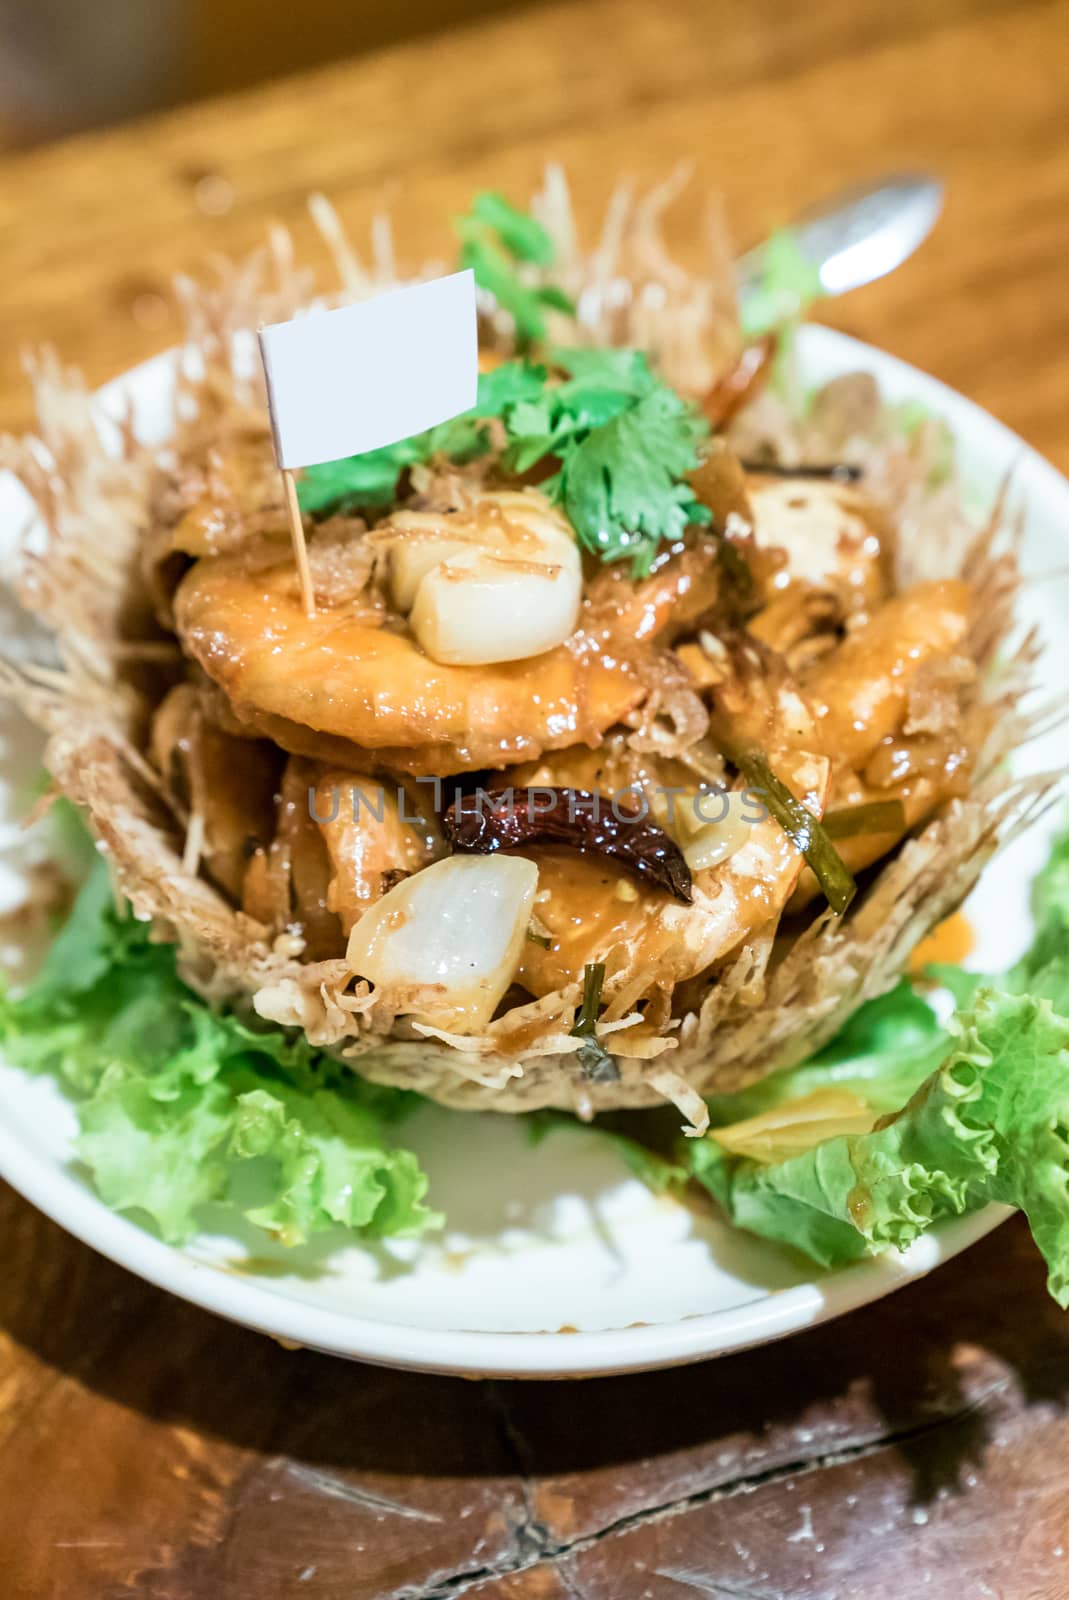 Shrimp with Tamarind sauce by vichie81